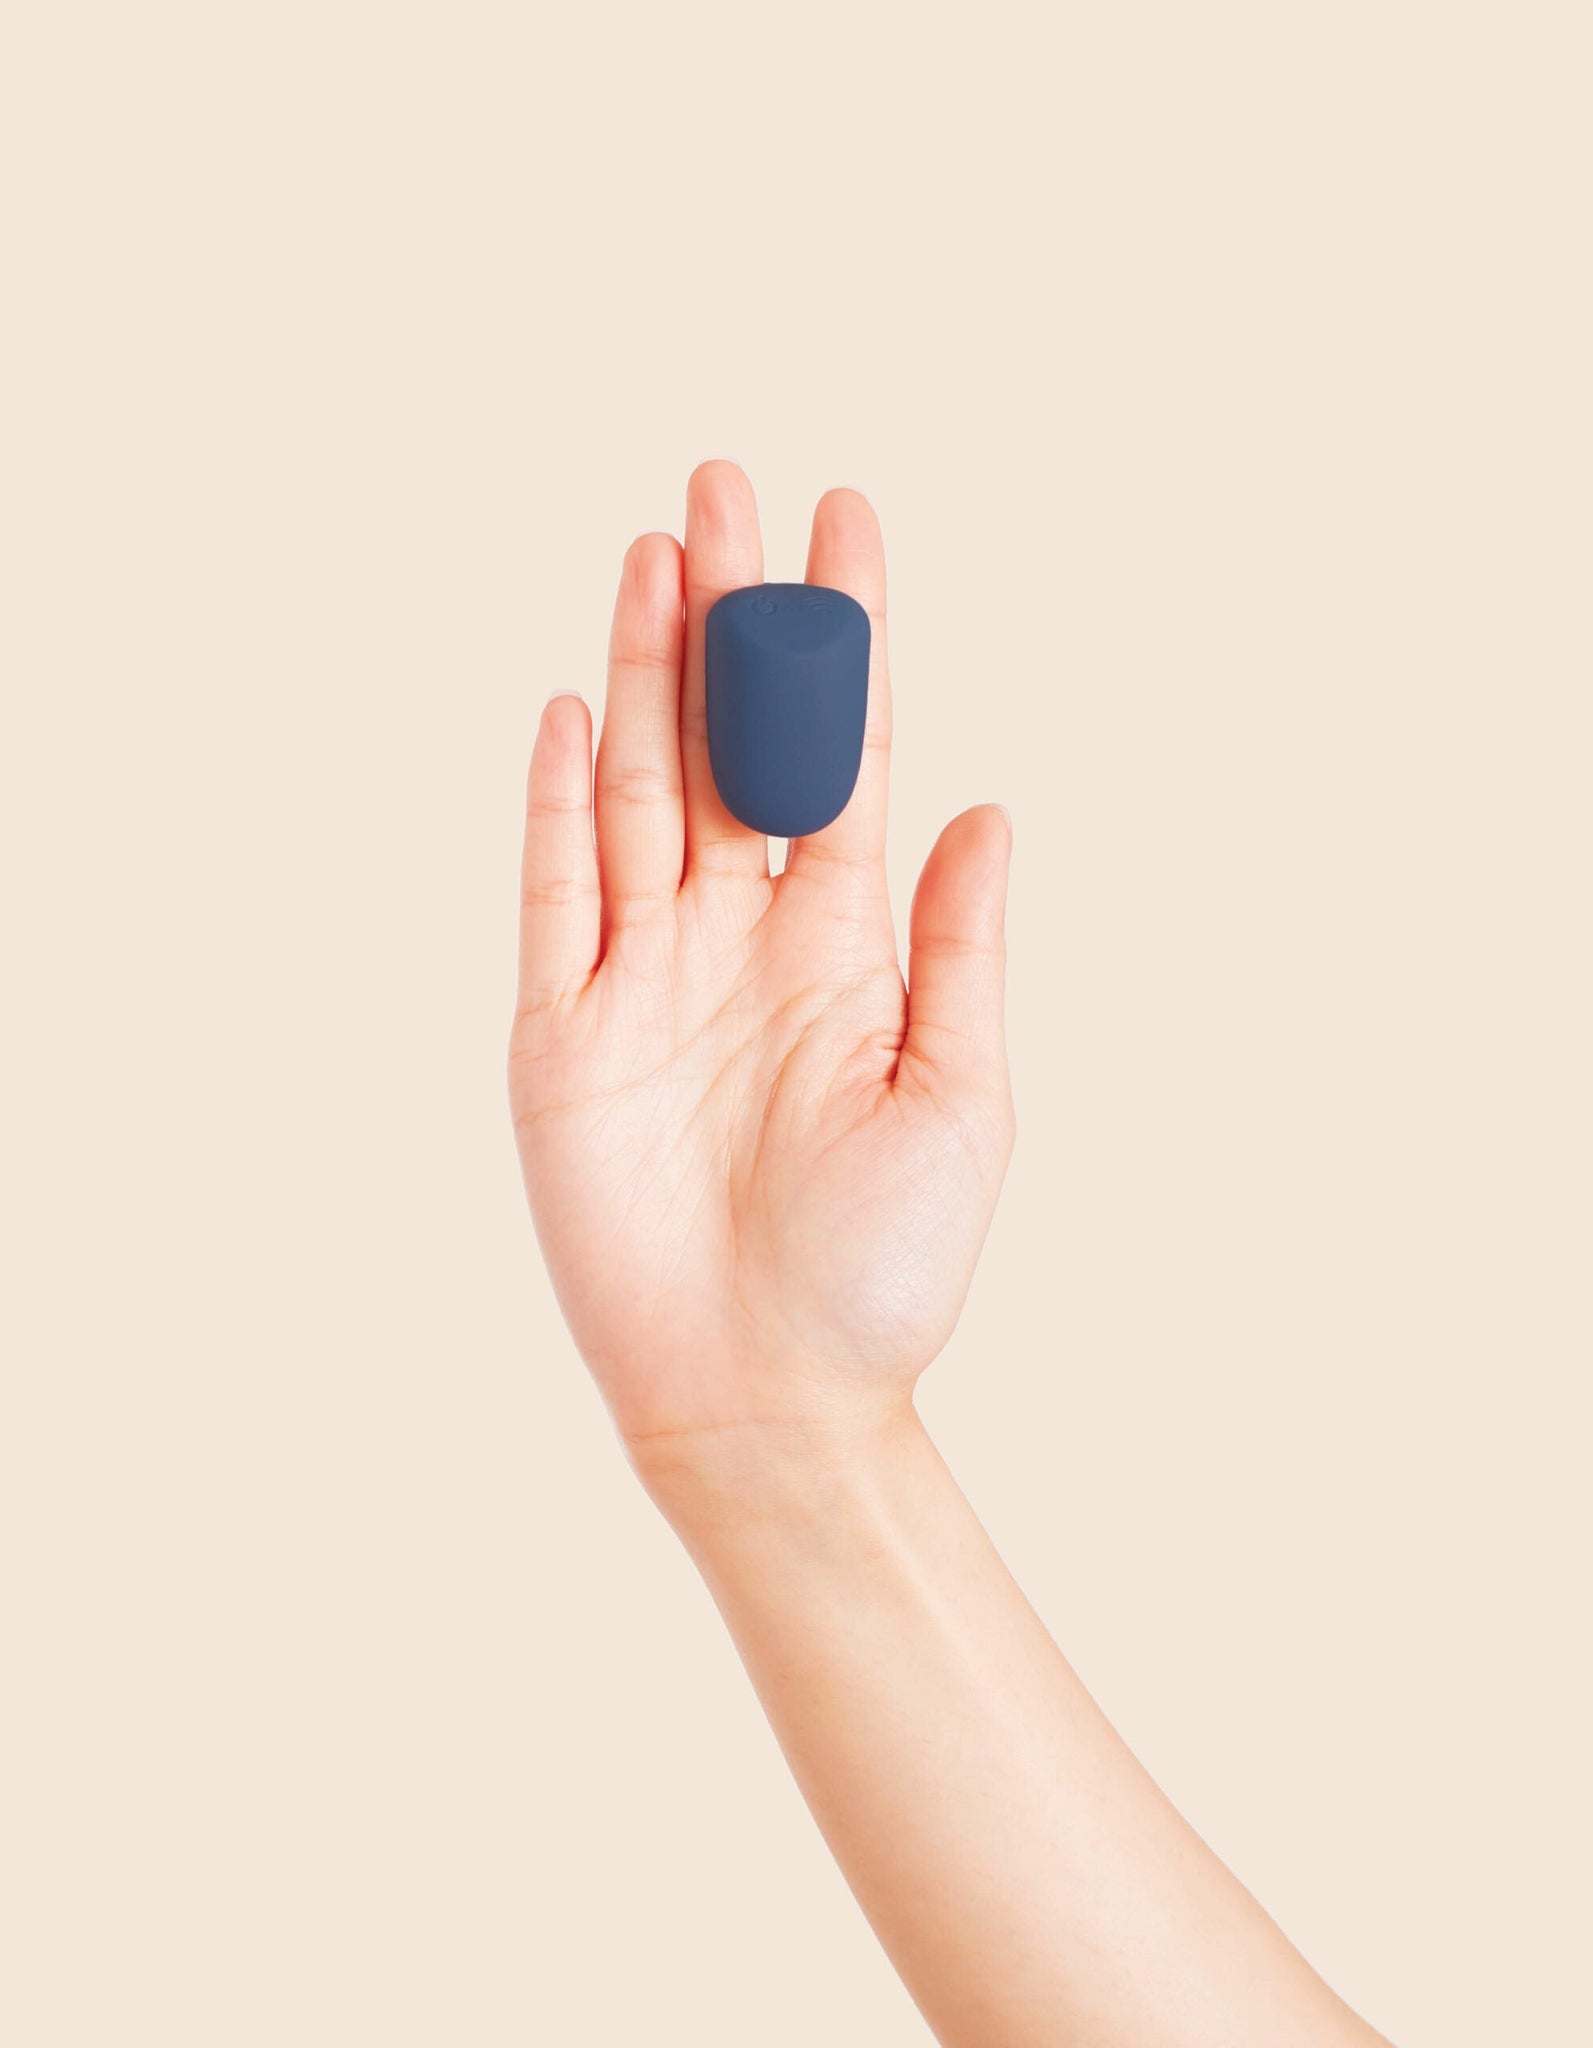 Deia - the Wearable vibrator remote  being held between fingers